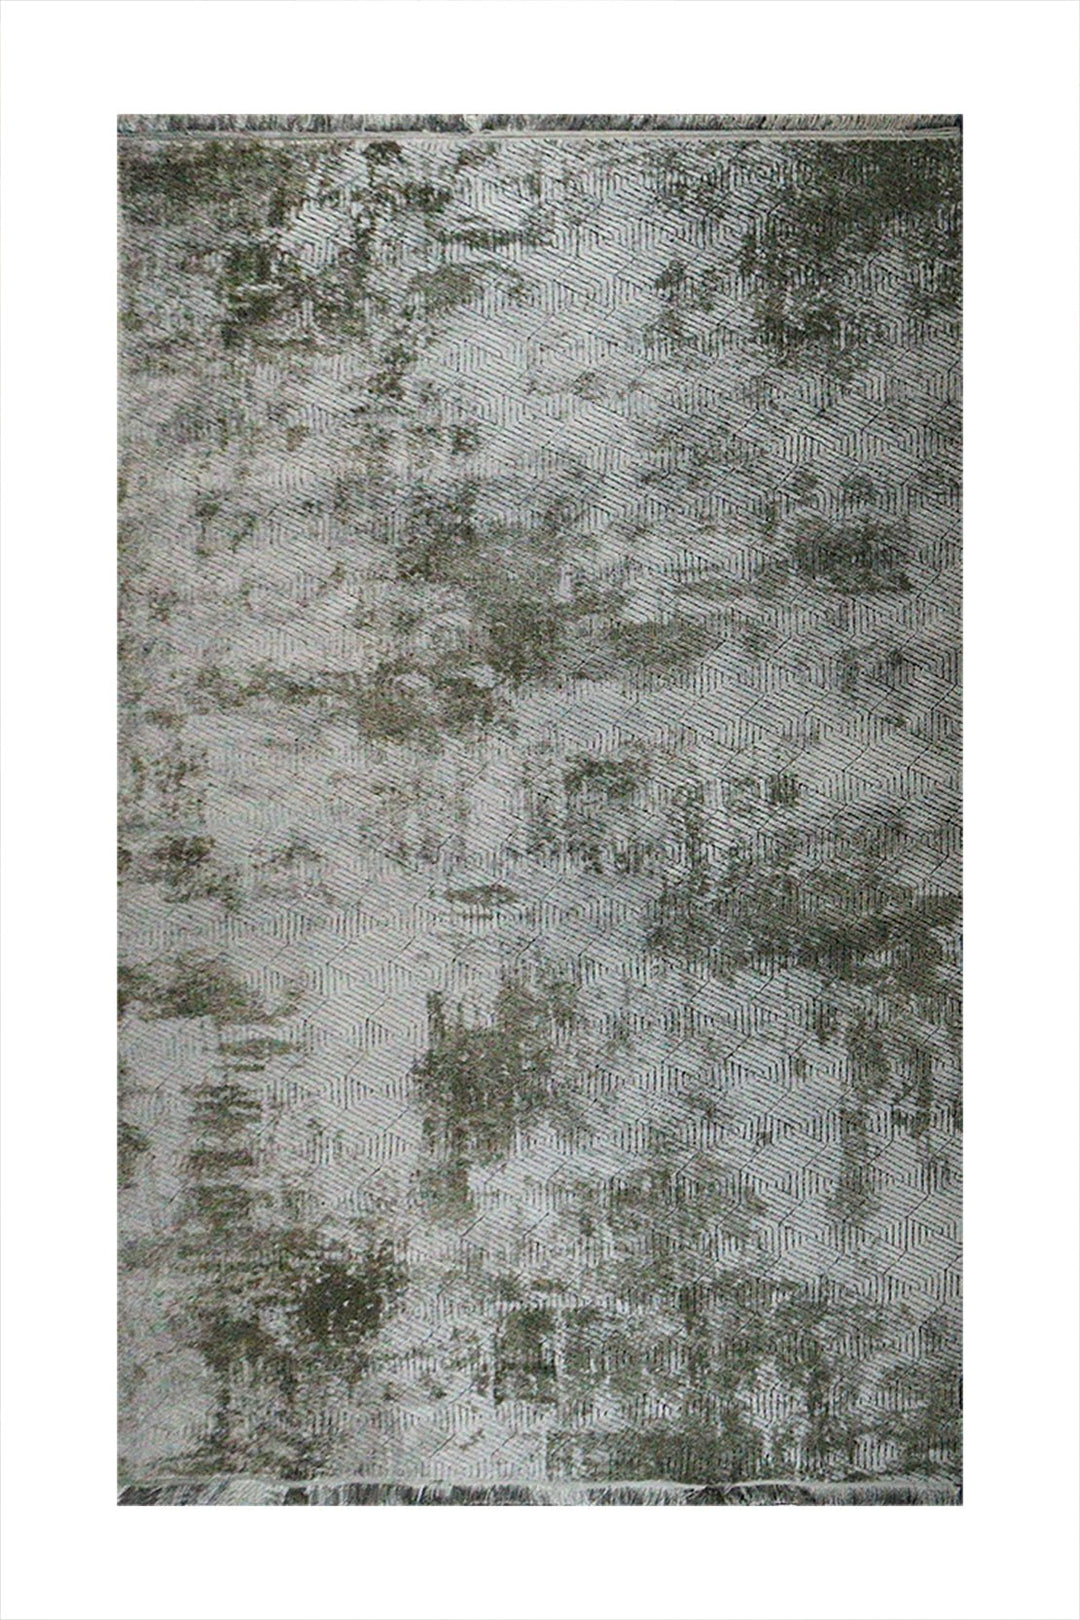 Turkish Modern Festival 1 Rug - 7.8 x 10.1 FT - Gray - Sleek and Minimalist for Chic Interiors - V Surfaces